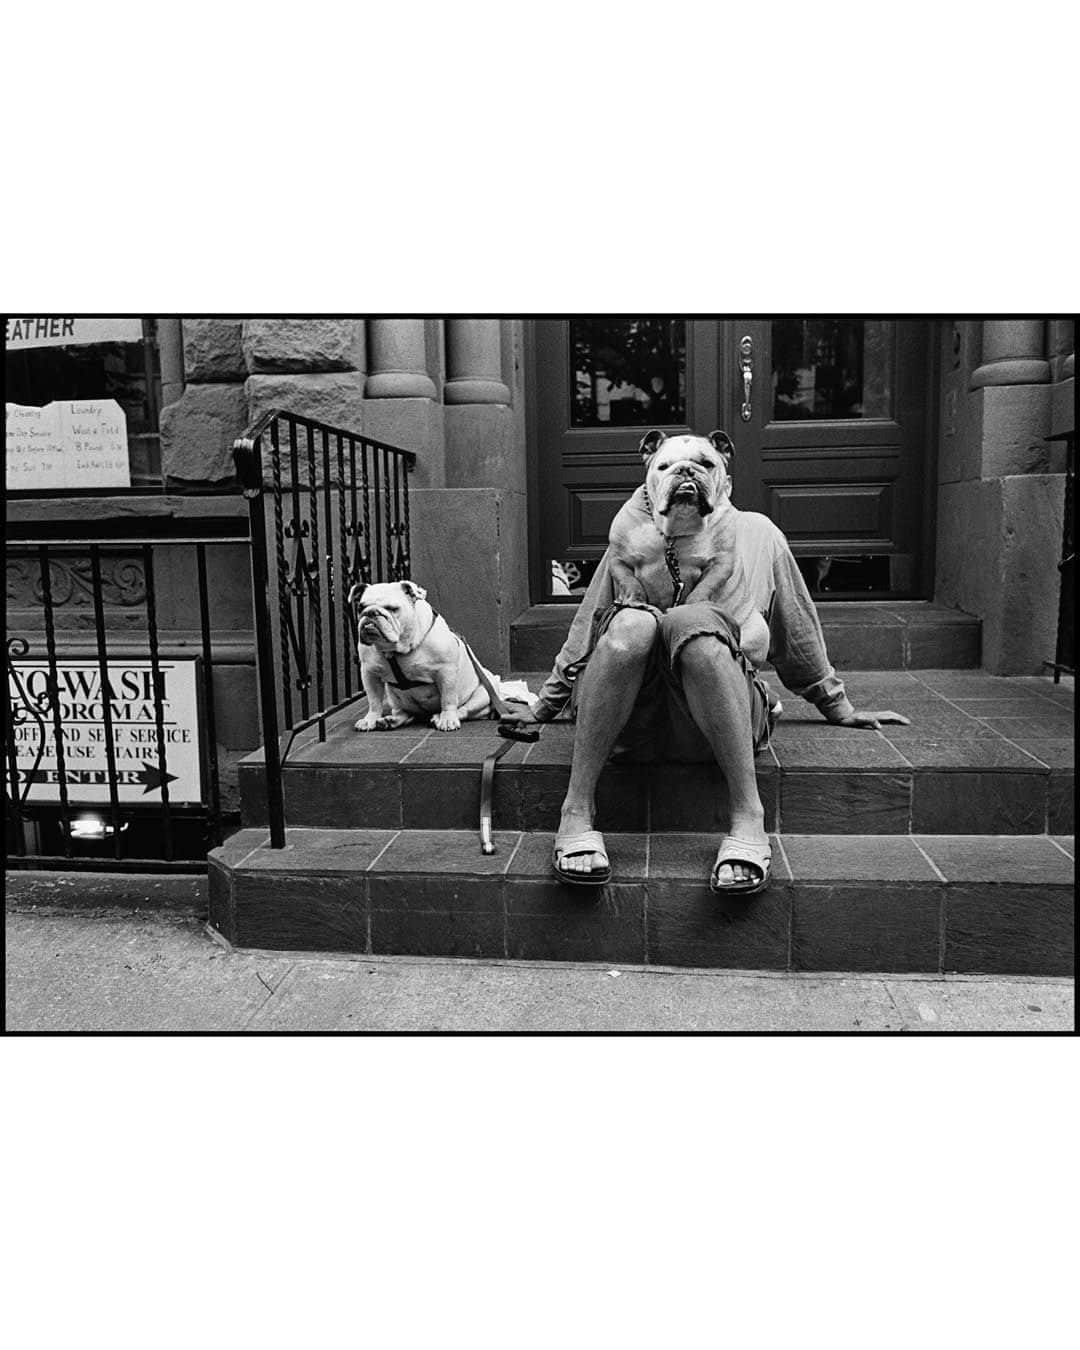 Magnum Photosさんのインスタグラム写真 - (Magnum PhotosInstagram)「Remembering @elliotterwitt (1928-2023), a remarkable photographer and long-time Magnum member whose lens beautifully captured the human experience.⁠ ⁠ Spanning over seven decades, Erwitt’s career leaves an indelible mark on the medium of photography, effortlessly blending the profound with a touch of humor.⁠ ⁠ Erwitt believed photography should speak to the senses and emotions: “When the photograph happens, it comes easily, as a gift that should not be questioned or analyzed.” He preferred not to intellectualize his profession, often stating simply that photography allowed him to pursue his interests while making a living.⁠ ⁠ Dogs held a special place in Erwitt’s heart, offering insights into humanity. In his 1998 book Dog Dogs, he noted, “I don’t know of any other animals closer to us in qualities of heart, sentiment and loyalty.”⁠ ⁠ Love and romance were recurring themes in Erwitt’s work, with iconic shots like a couple kissing in a car’s side mirror and Robert and Mary Frank dancing in a kitchen resonating across generations.⁠ ⁠ Throughout his career, Erwitt captured notable figures like Marilyn Monroe, Grace Kelly, Jack Kerouac, John F. Kennedy and Jackie Kennedy. He witnessed and documented pivotal moments in history, from the 1959 Kitchen Debate between Nikita Khrushchev and Richard Nixon to portraits of Fidel Castro and Che Guevara in 1964.⁠ ⁠ 🔗 We reflect on the life and work of the legendary Magnum image-maker at the link in the @magnumphotos bio.⁠ ⁠ PHOTOS (left to right):⁠ ⁠ (1) Provence, France. 1955.⁠ ⁠ (2) Marilyn Monroe. New York, USA. 1956. ⁠ ⁠ (3) New York, USA. 1974.⁠ ⁠ (4) Nikita Khrushchev and Richard Nixon. The Kitchen Debate. Moscow, USSR. 1959. ⁠ ⁠ (5) Eiffel tower 100th anniversary. Paris, France. 1989. ⁠ ⁠ (6) Berkeley, California, USA. 1956.⁠ ⁠ (7) Prado Museum. Madrid, Spain. 1995. ⁠ ⁠ (8) Che Guevara. Havana, Cuba. 1964. ⁠ ⁠ (9) New York City, USA. 2000.⁠ ⁠ (10) Valencia, Spain. 1952.⁠ ⁠ © @elliotterwitt / Magnum Photos」12月1日 21時45分 - magnumphotos